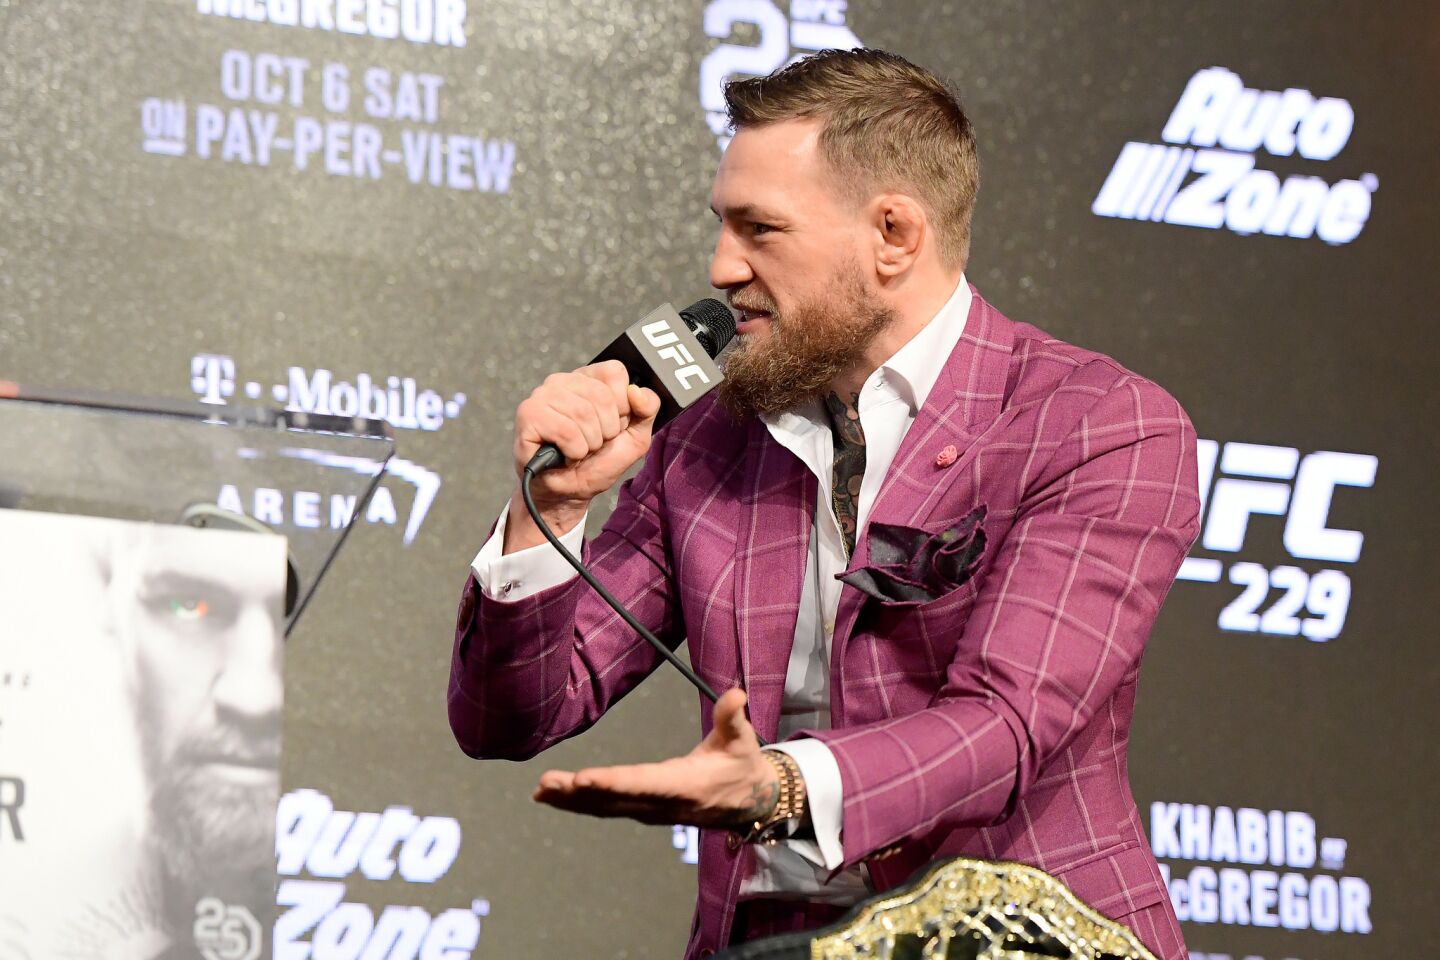 NEW YORK, NY - SEPTEMBER 20: Conor McGregor speaks to the media during the UFC 229 Press Conference at Radio City Music Hall on September 20, 2018 in New York City. (Photo by Steven Ryan/Getty Images) ** OUTS - ELSENT, FPG, CM - OUTS * NM, PH, VA if sourced by CT, LA or MoD **